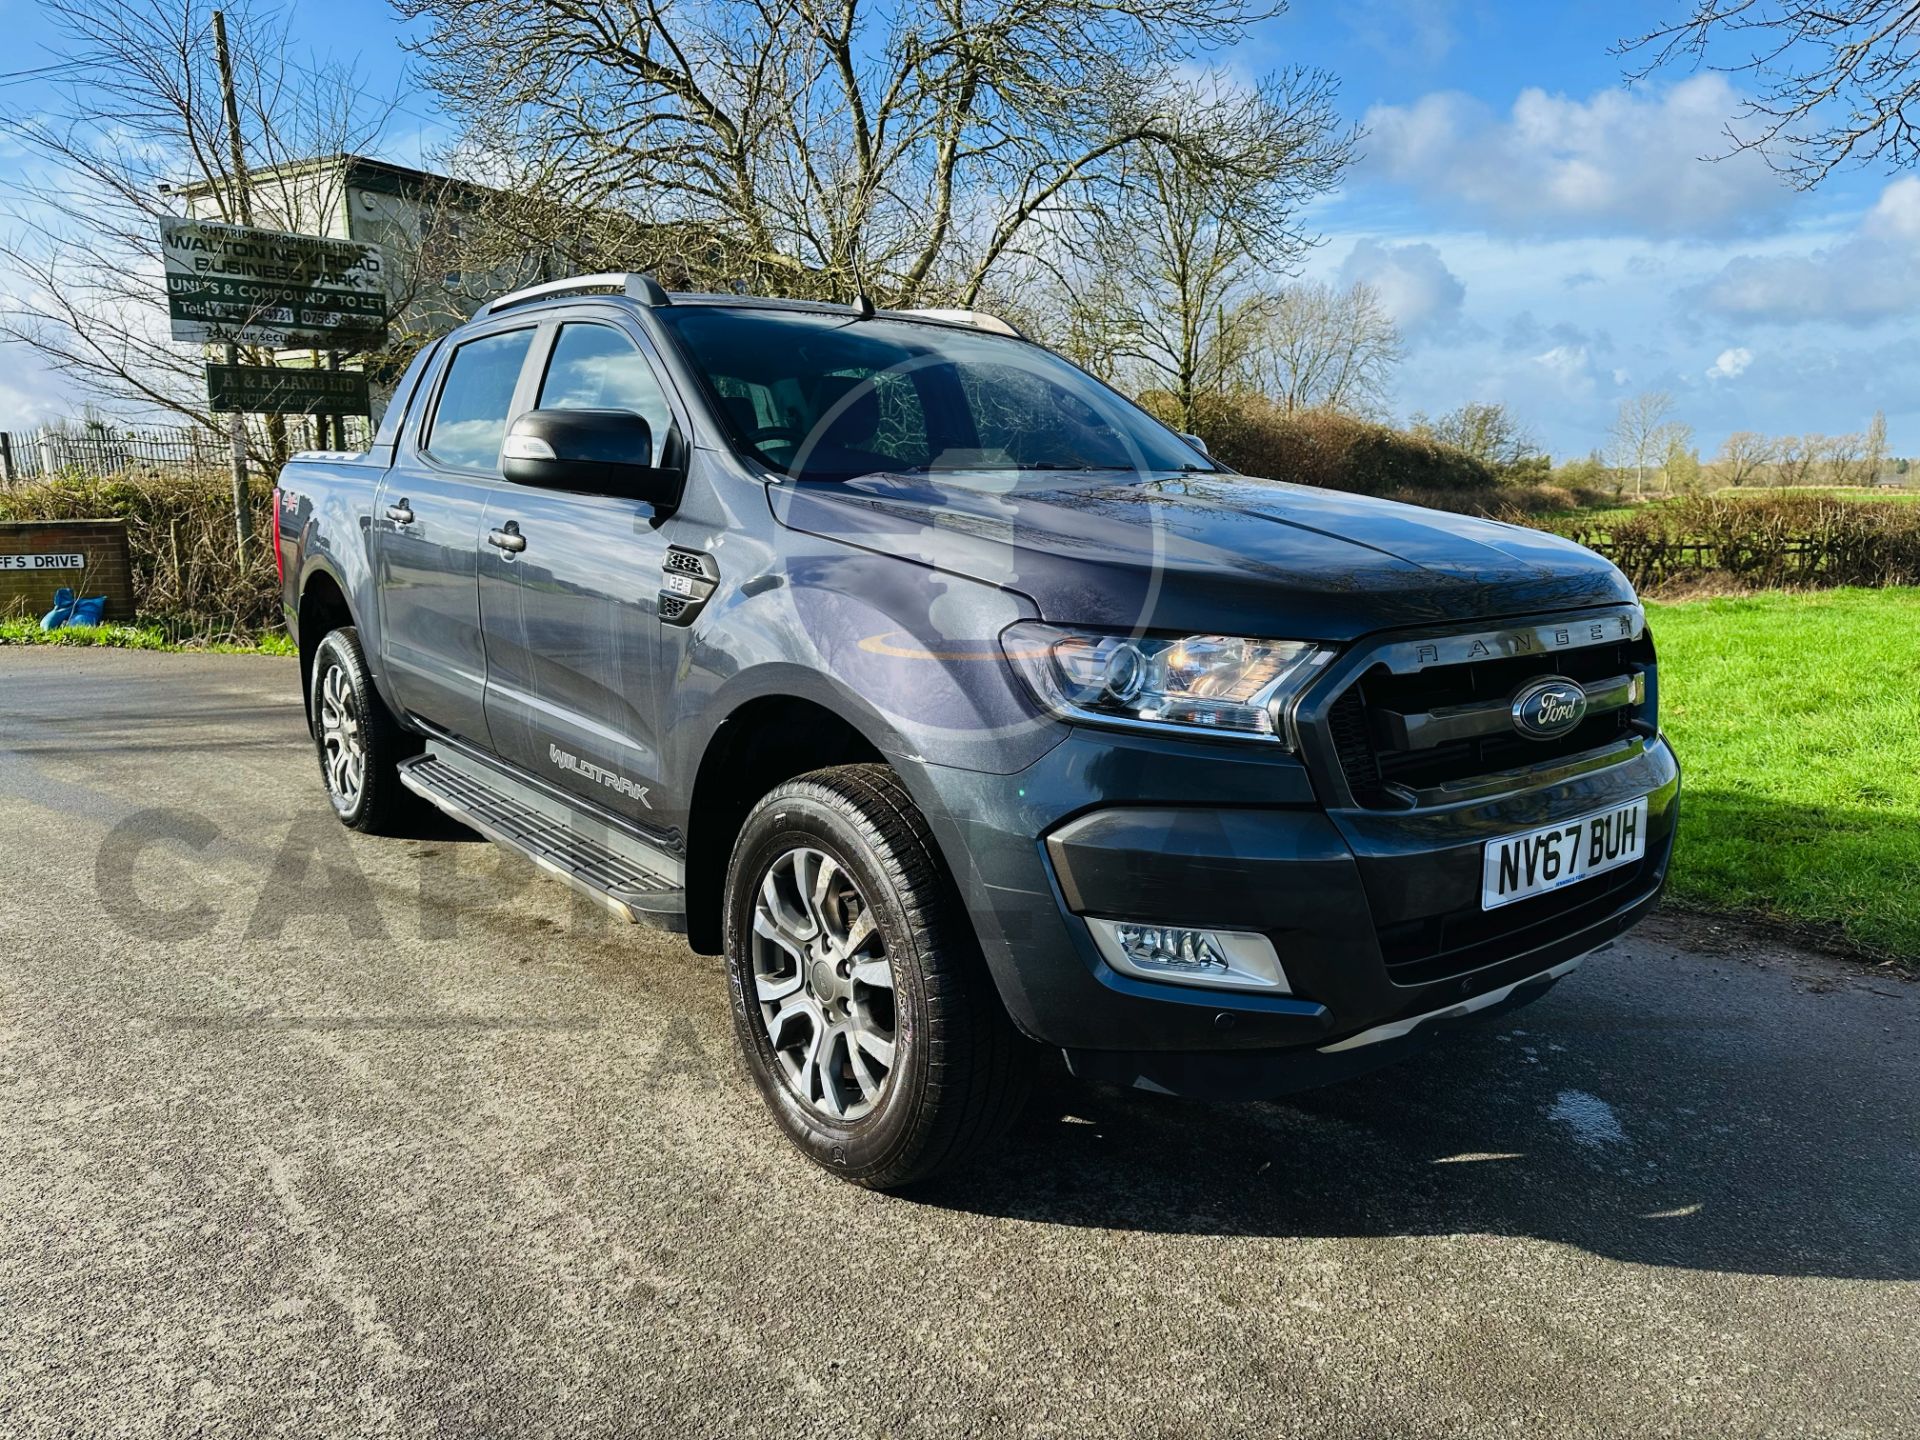 FORD RANGER *WILDTRAK EDITION* DOUBLE CAB PICK-UP (2018 - EURO 6) 3.2 TDCI - AUTOMATIC (1 OWNER) - Bild 2 aus 37